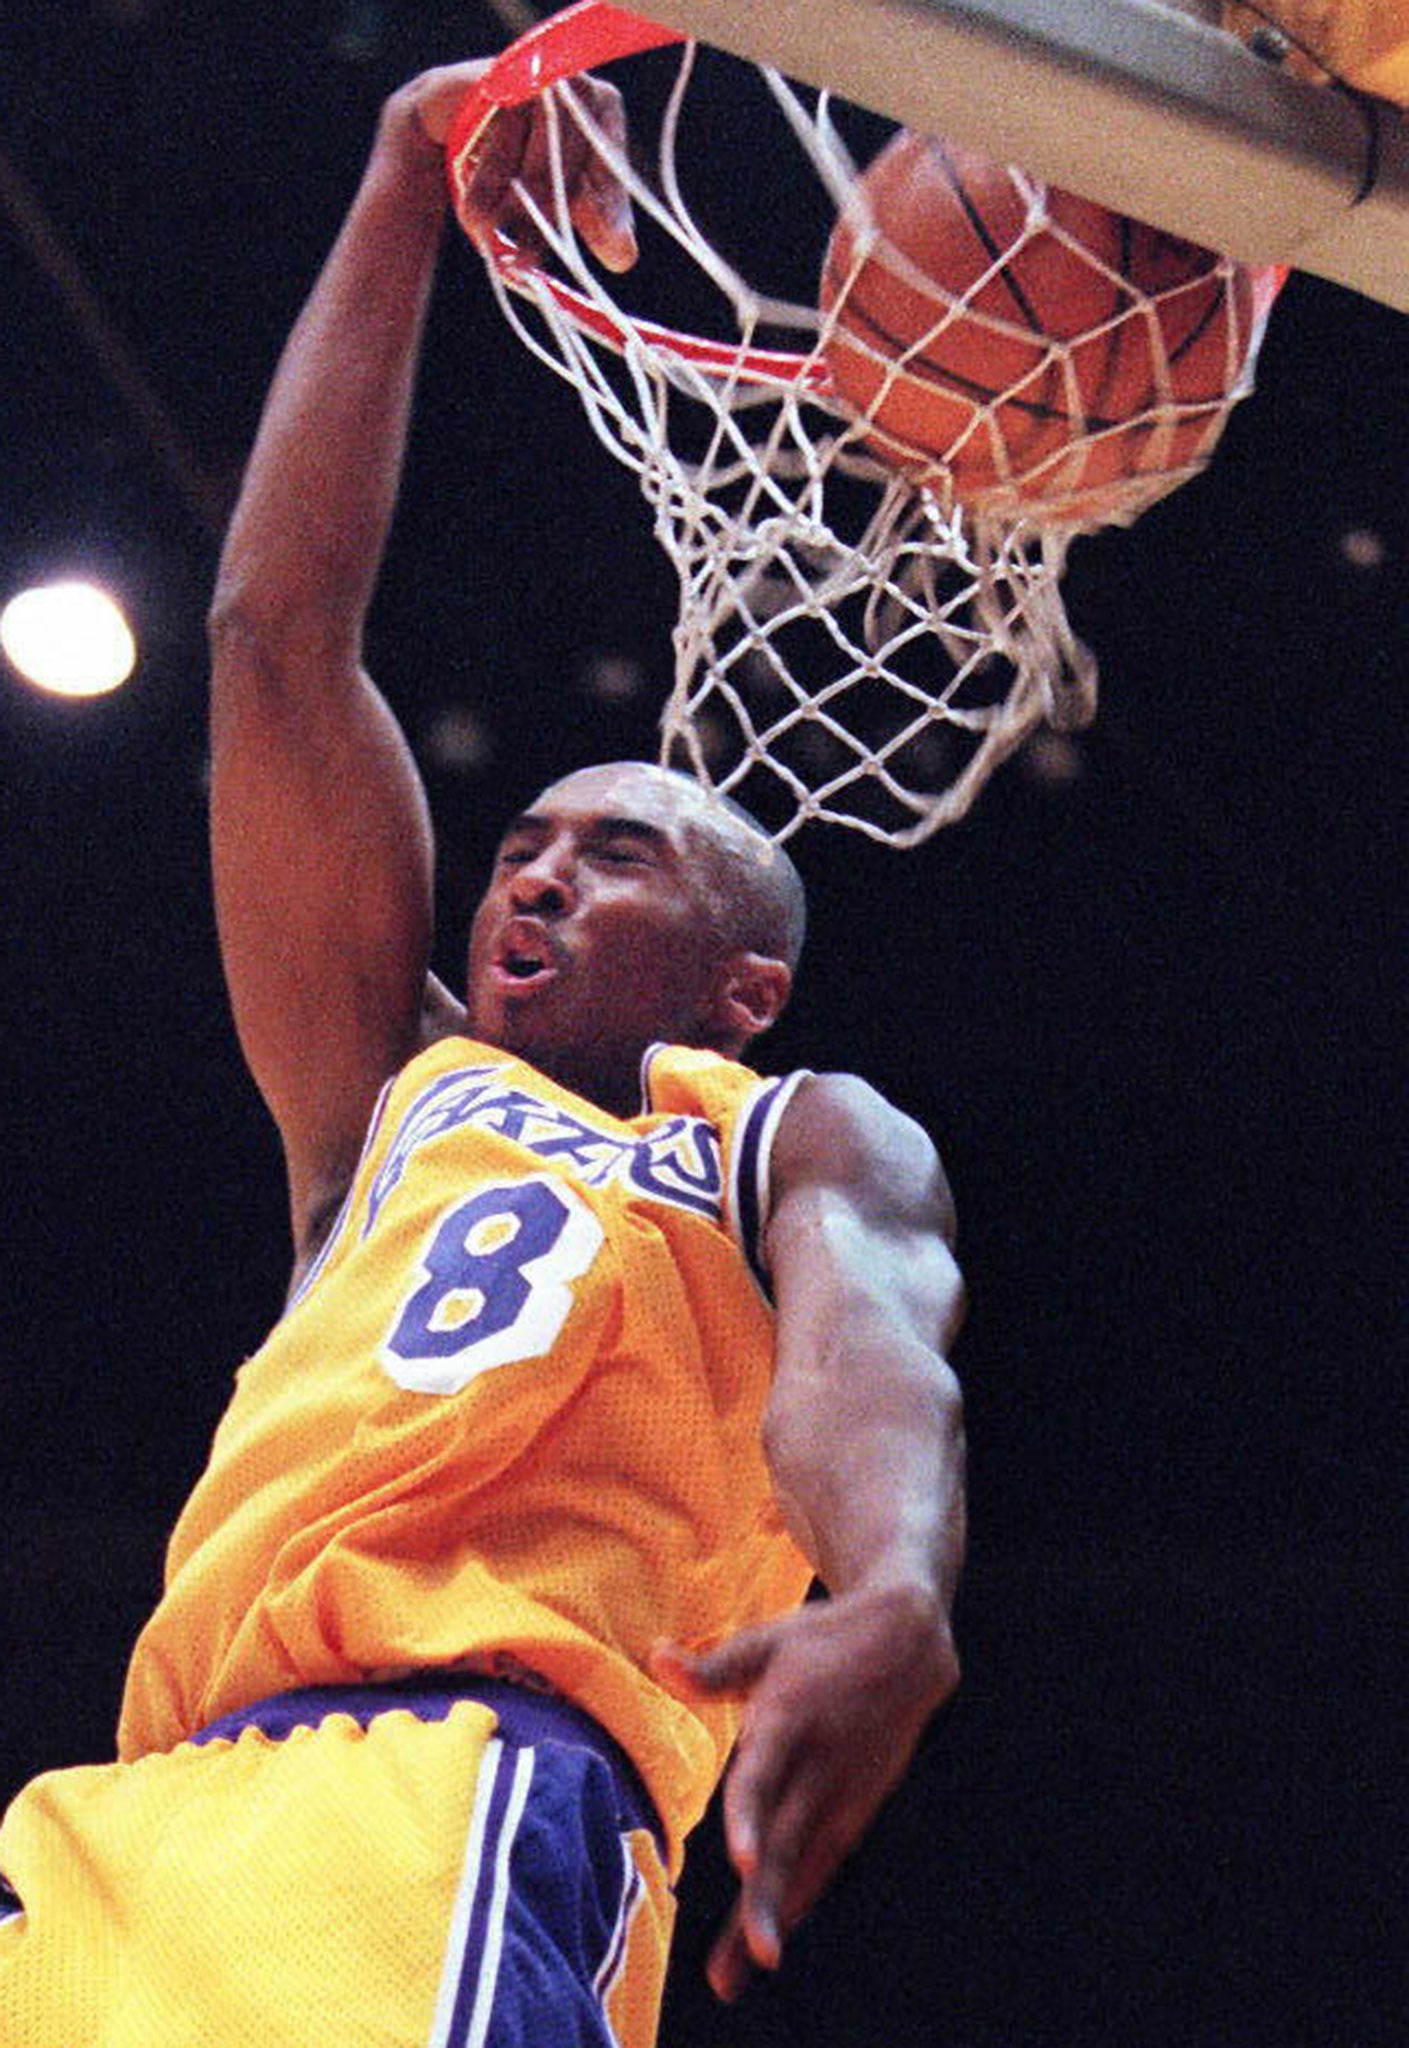 Bryant started for the LA Lakers in 1996 aged 18